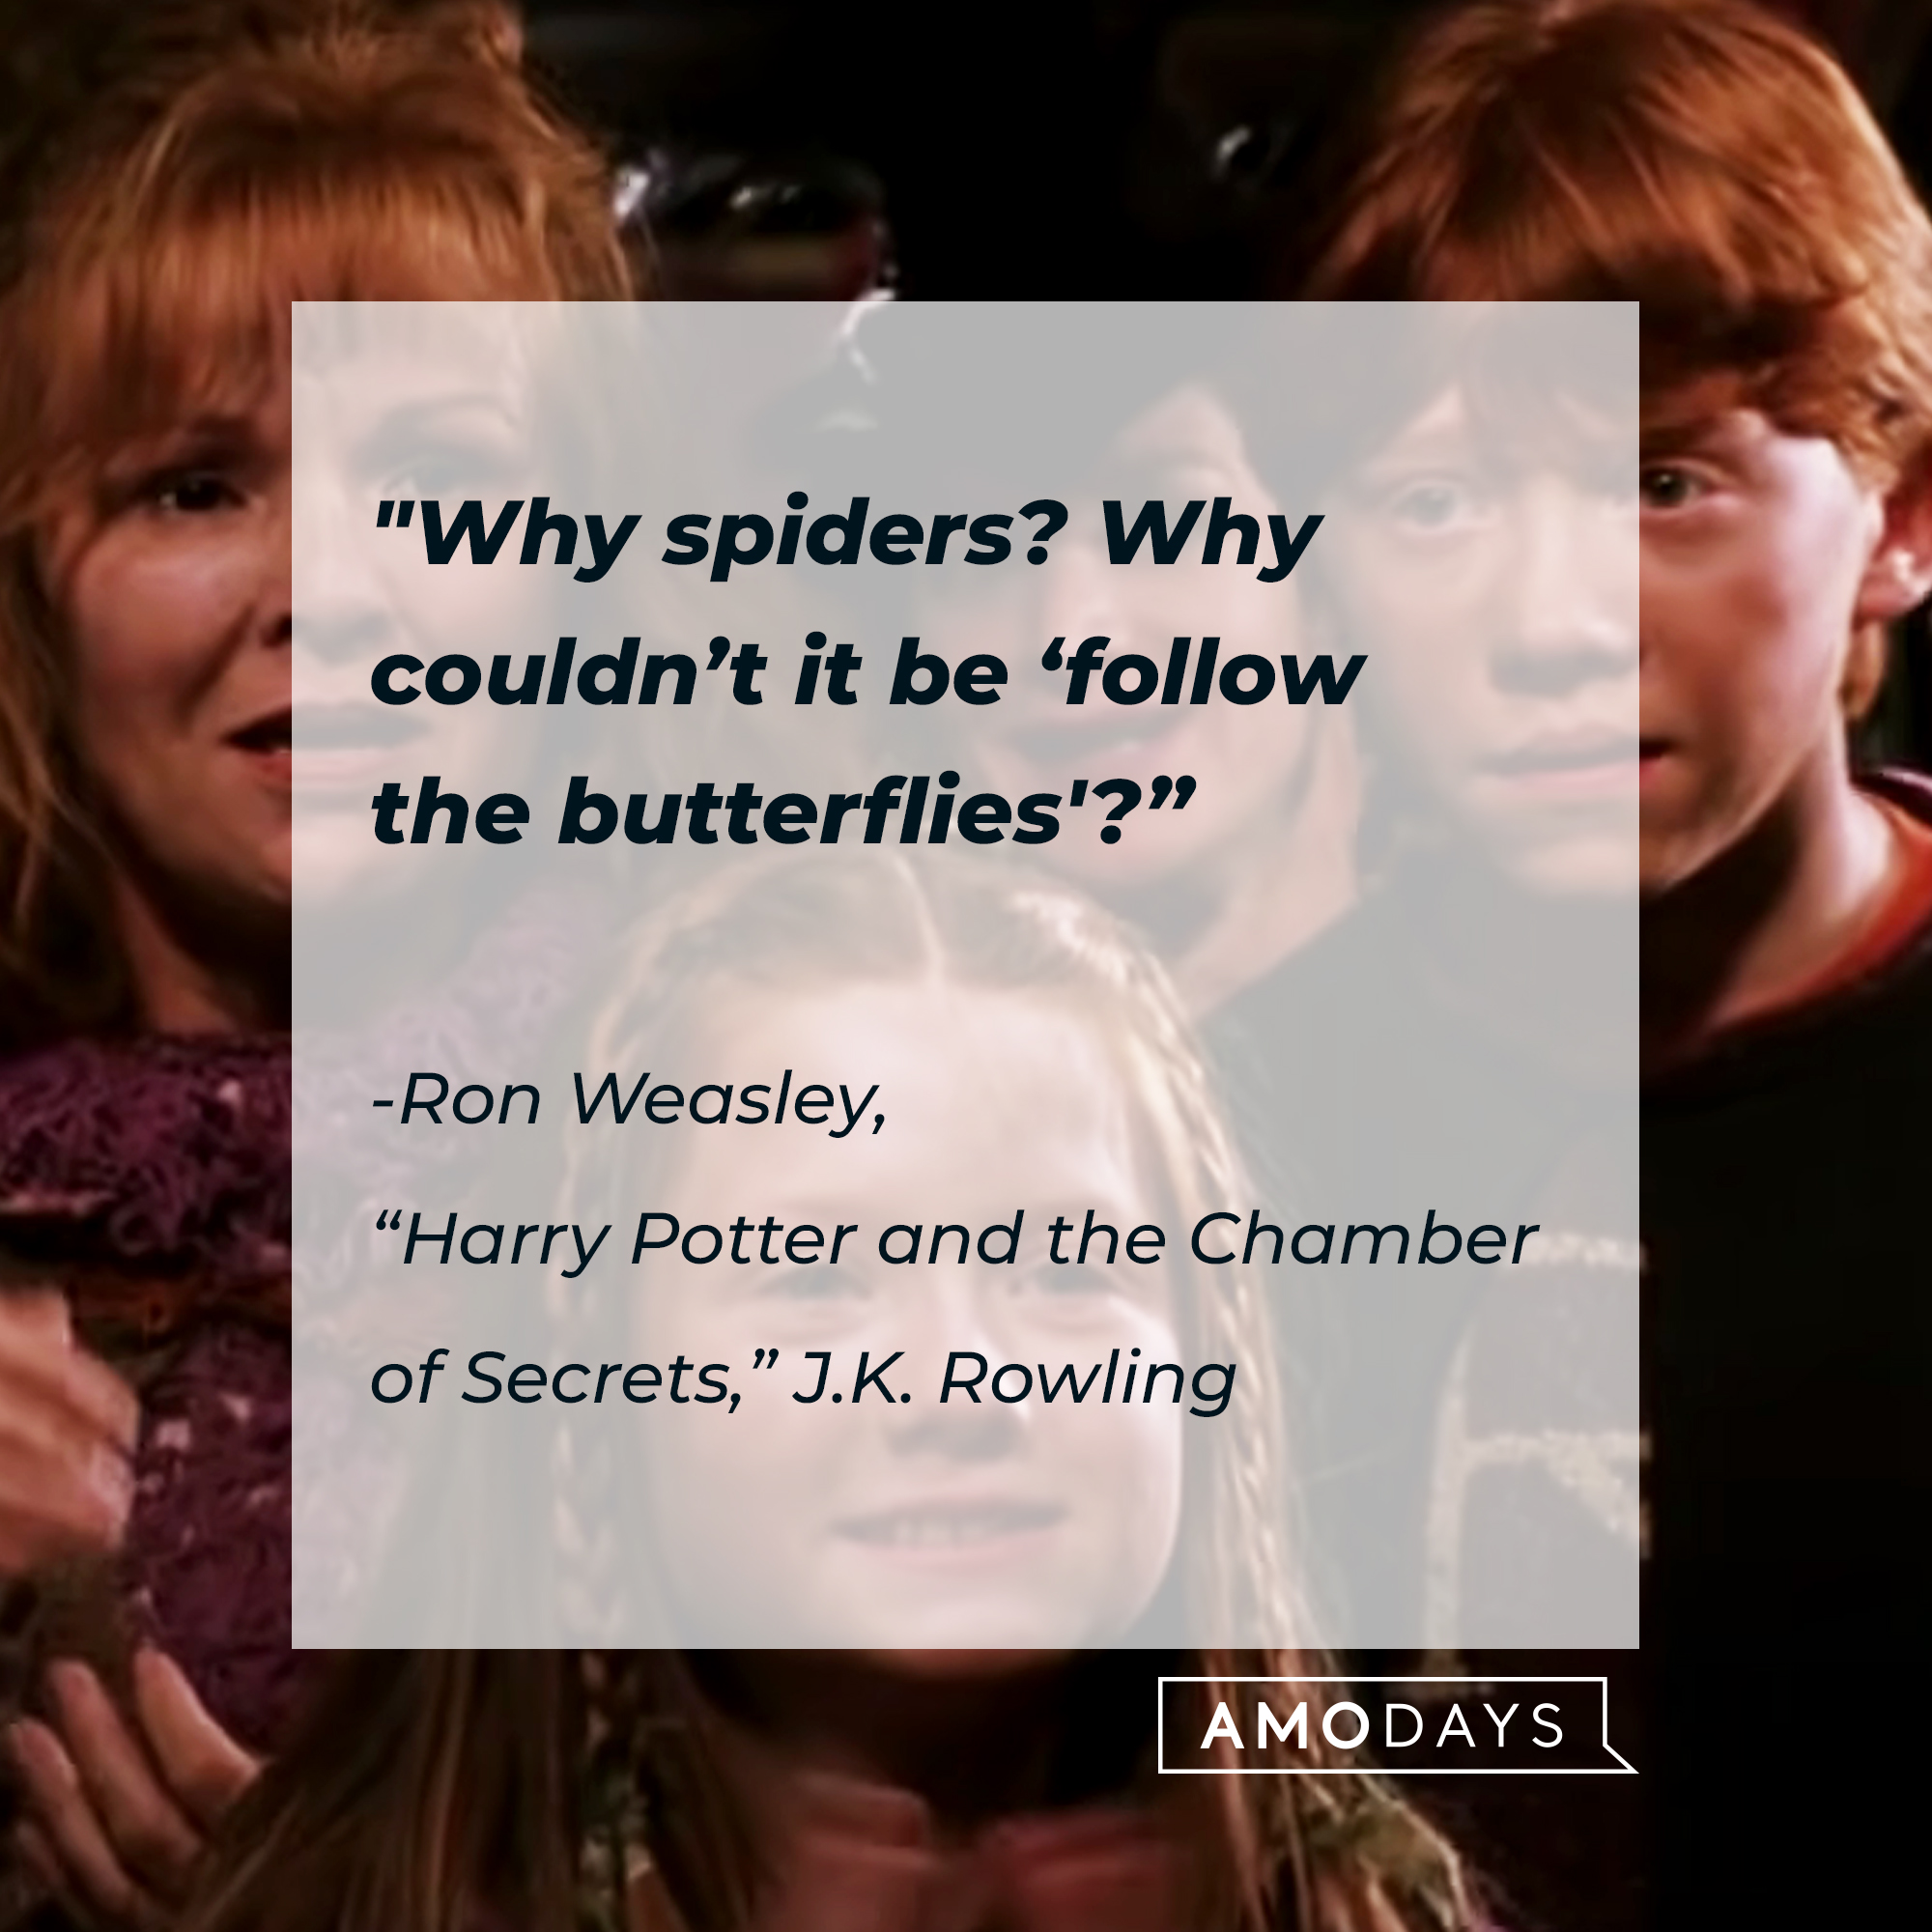 An image of Ron, Ginny and Molly Weasley with Ron’s quote: "Why spiders? Why couldn’t it be “follow the butterflies”?” | Source: Youtube.com/harrypotter